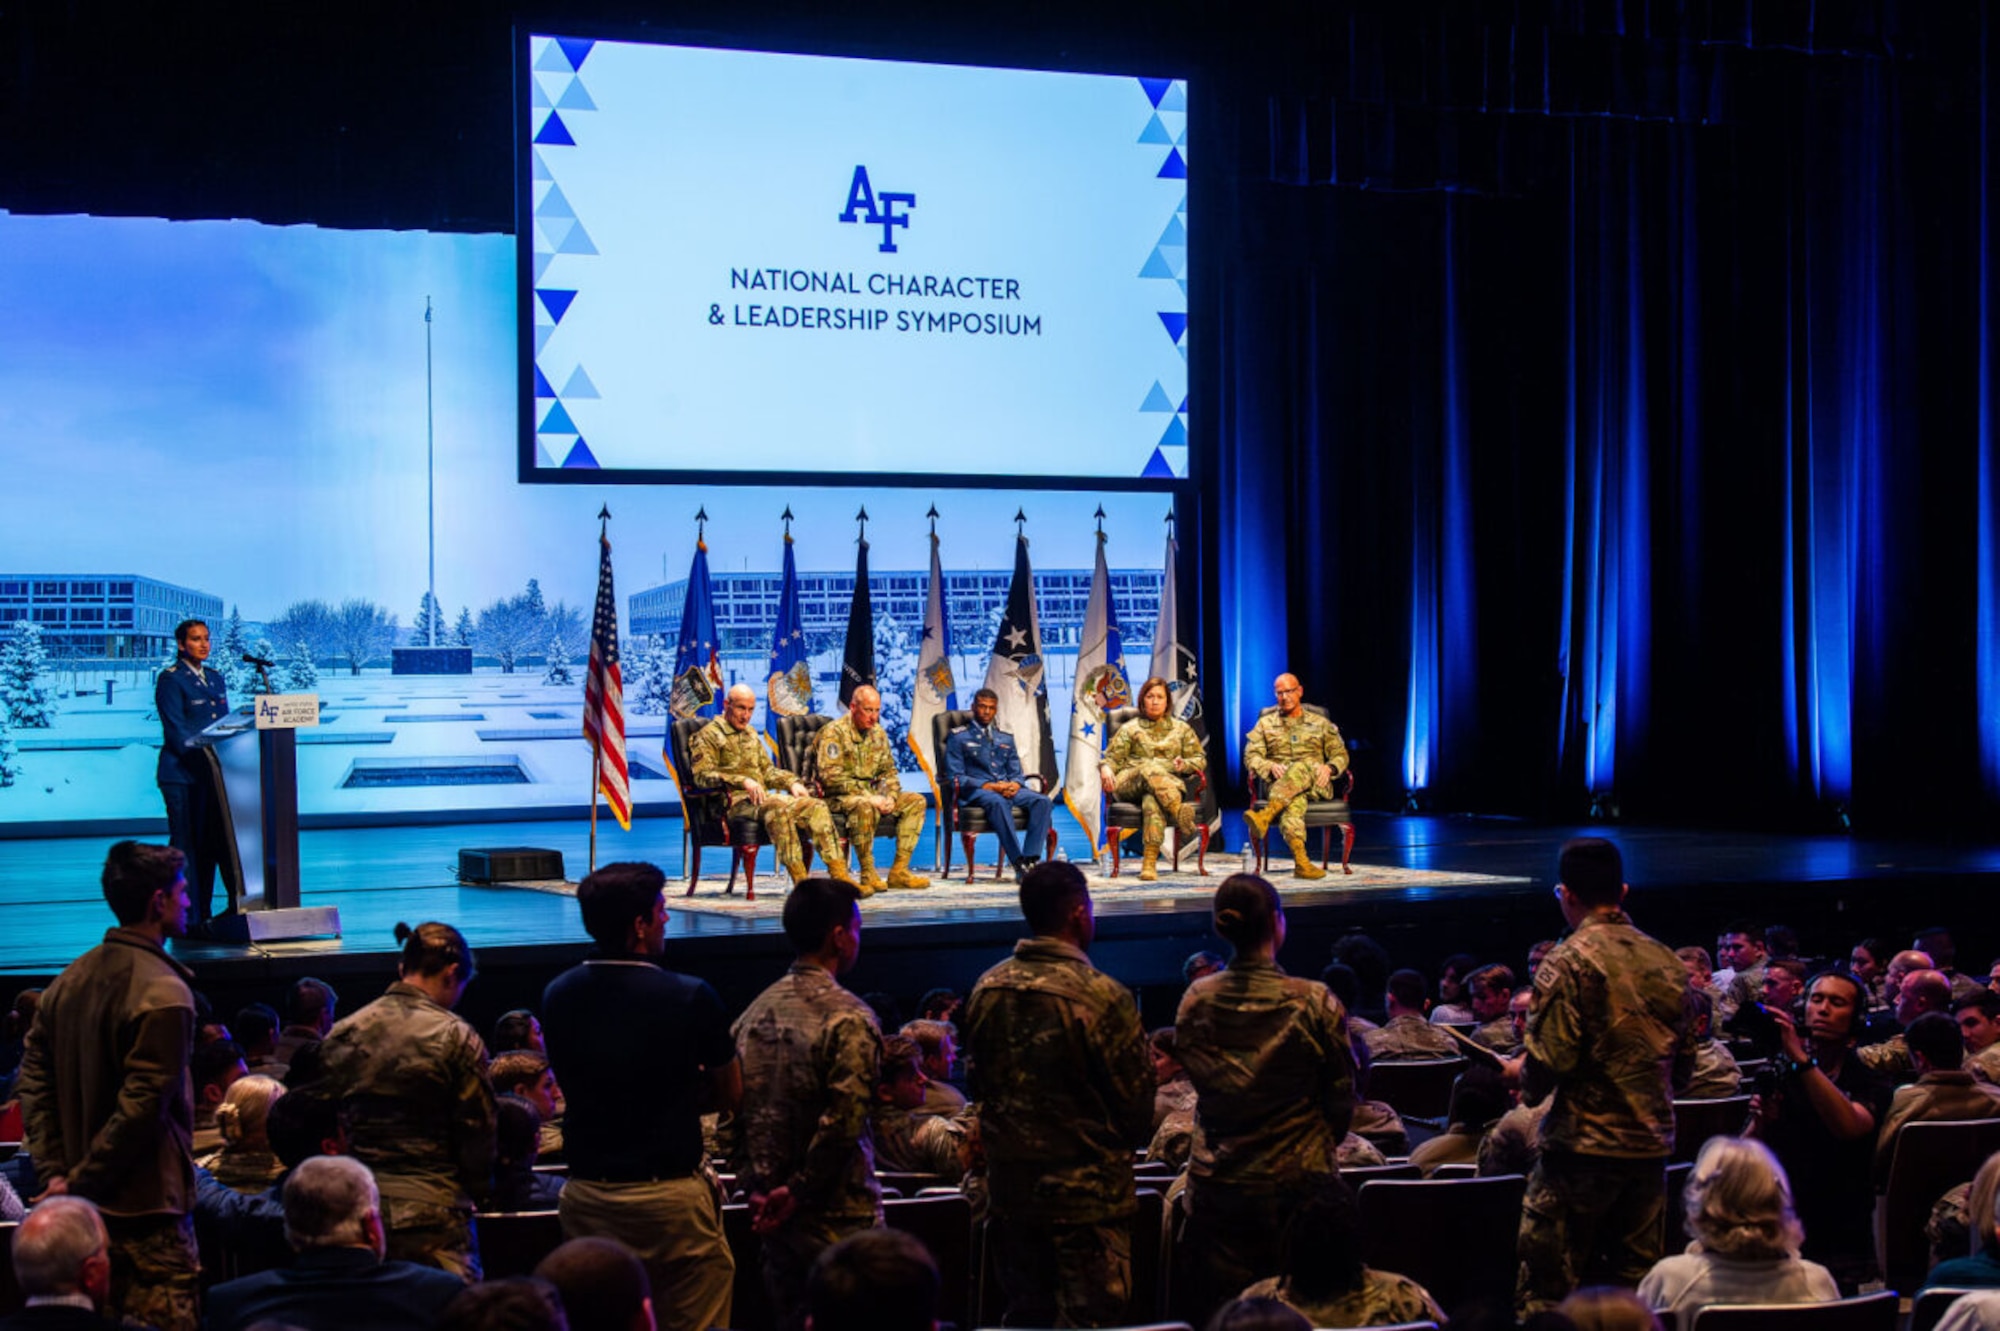 U.S. Air Force and Space Force senior leaders speak to a packed house